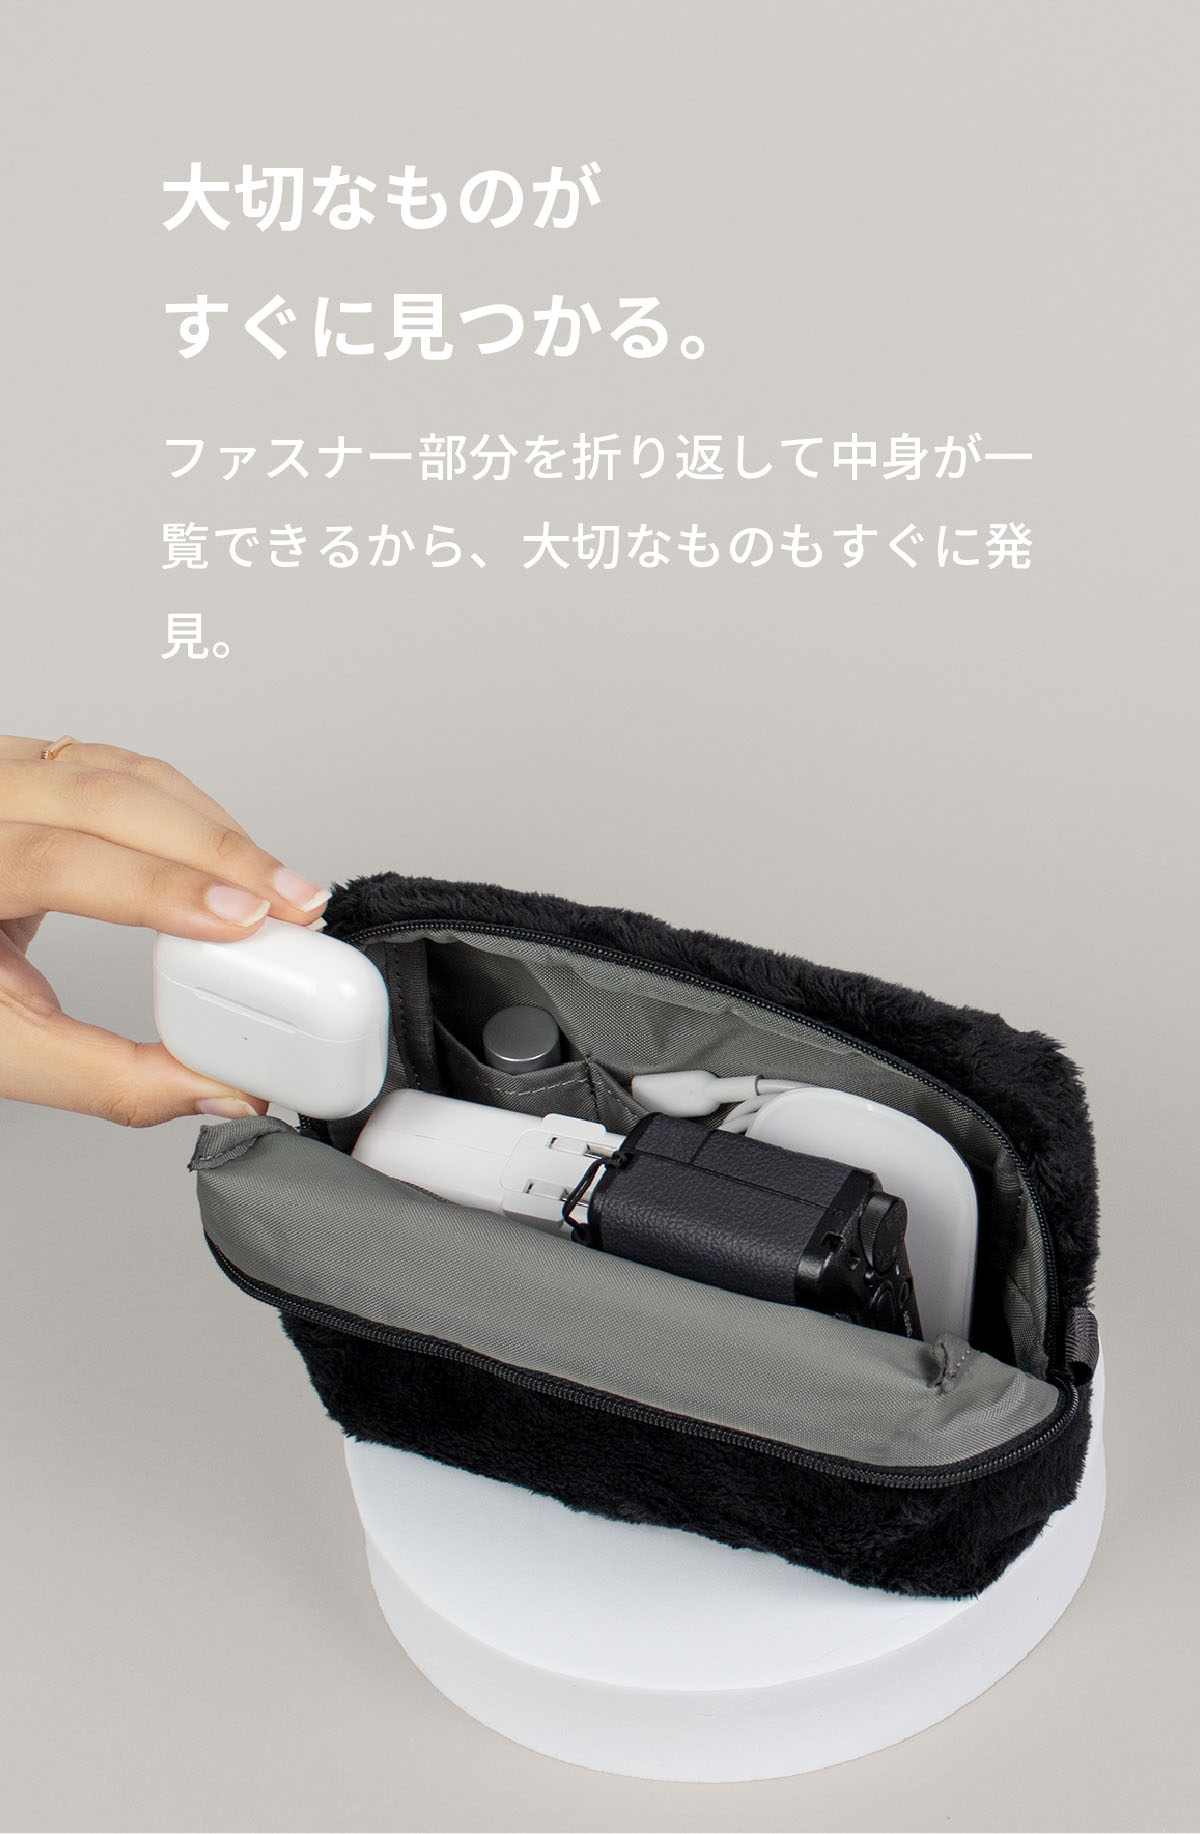 Fluff Pouch（フラッフポーチ）Lサイズ 化粧品 コスメポーチ メンズ 小物 ガジェット 送料無料 新生活 ギフト プレゼント プチギフト｜asoboze｜06